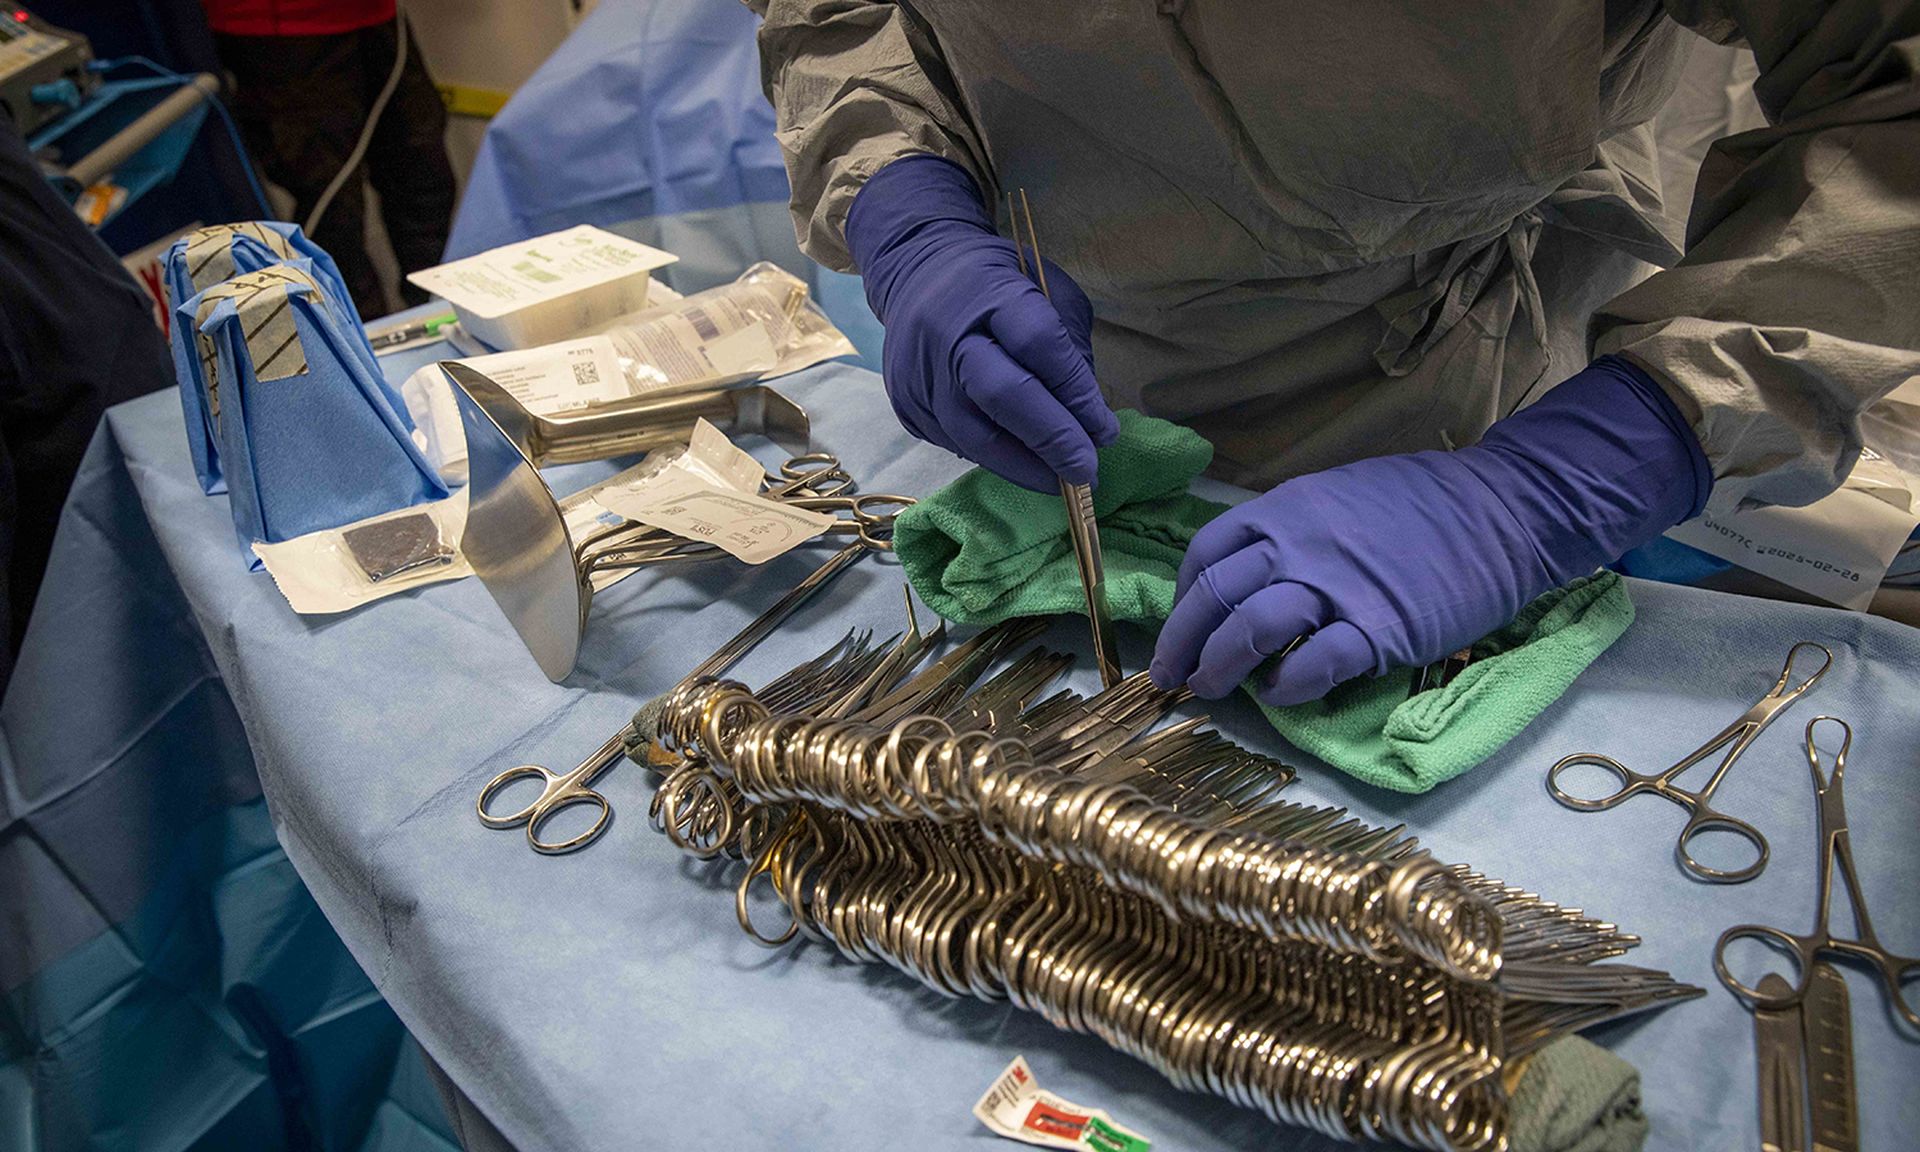 Digital health company myNurse notified patients of a hack, as well the end of clinical operations, but stressed the two were unrelated. Pictured: A U.S. Navy hospital corpsman inventories medical tools for a simulated surgery April 12, 2022, aboard the USS George H.W. Bush aircraft carrier. (Mass Communication Specialist 3rd Class Brandon Roberson...